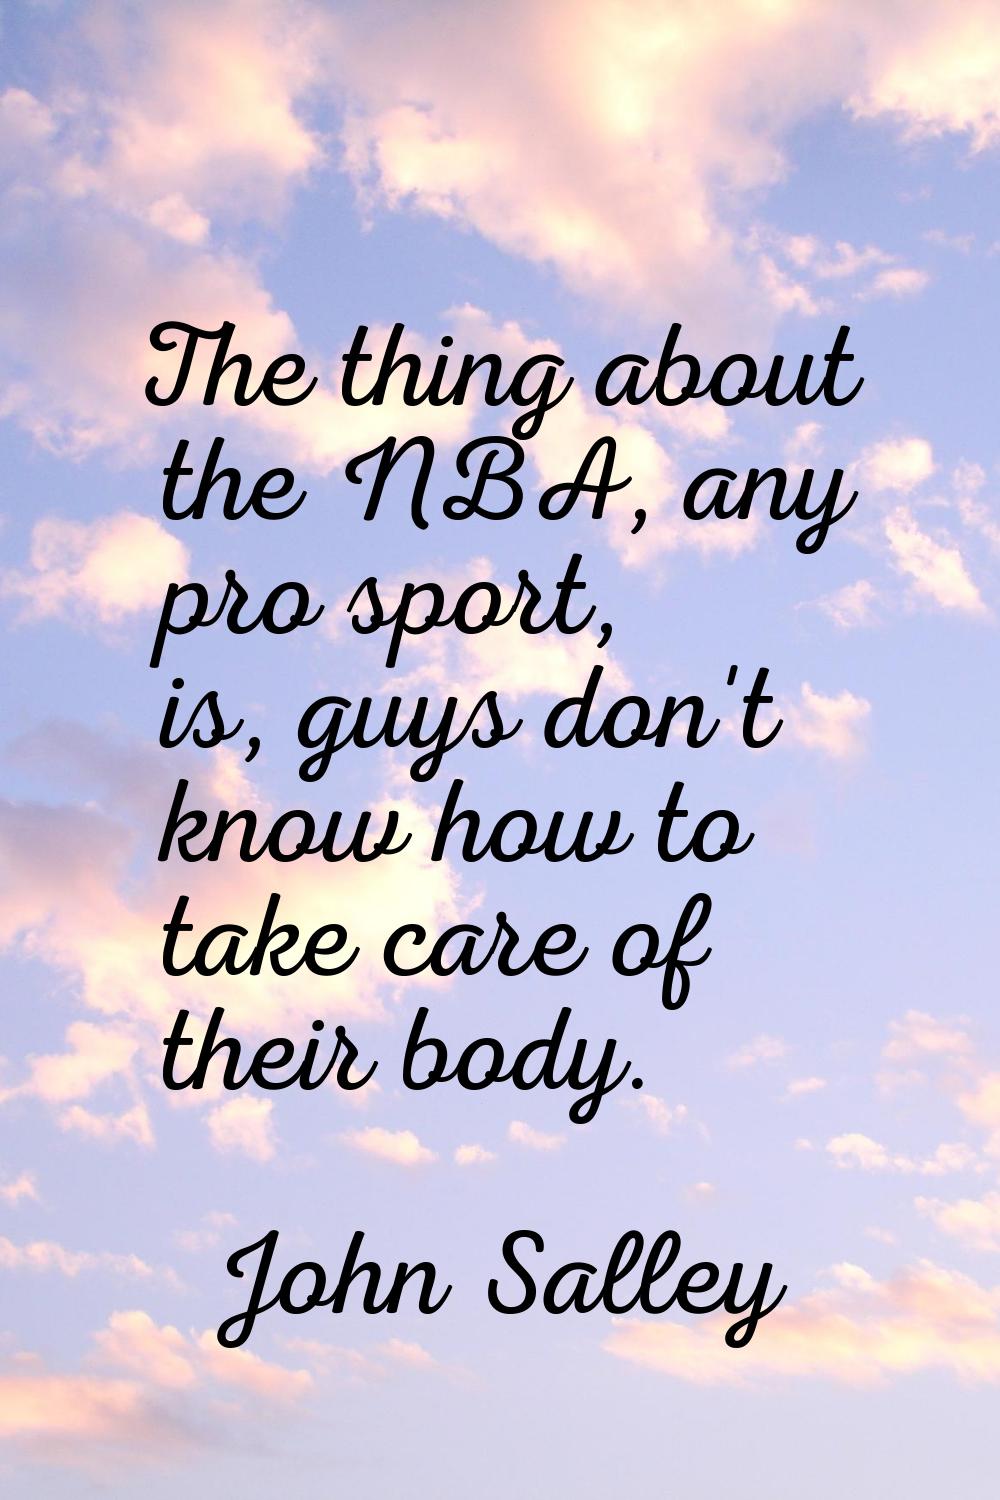 The thing about the NBA, any pro sport, is, guys don't know how to take care of their body.